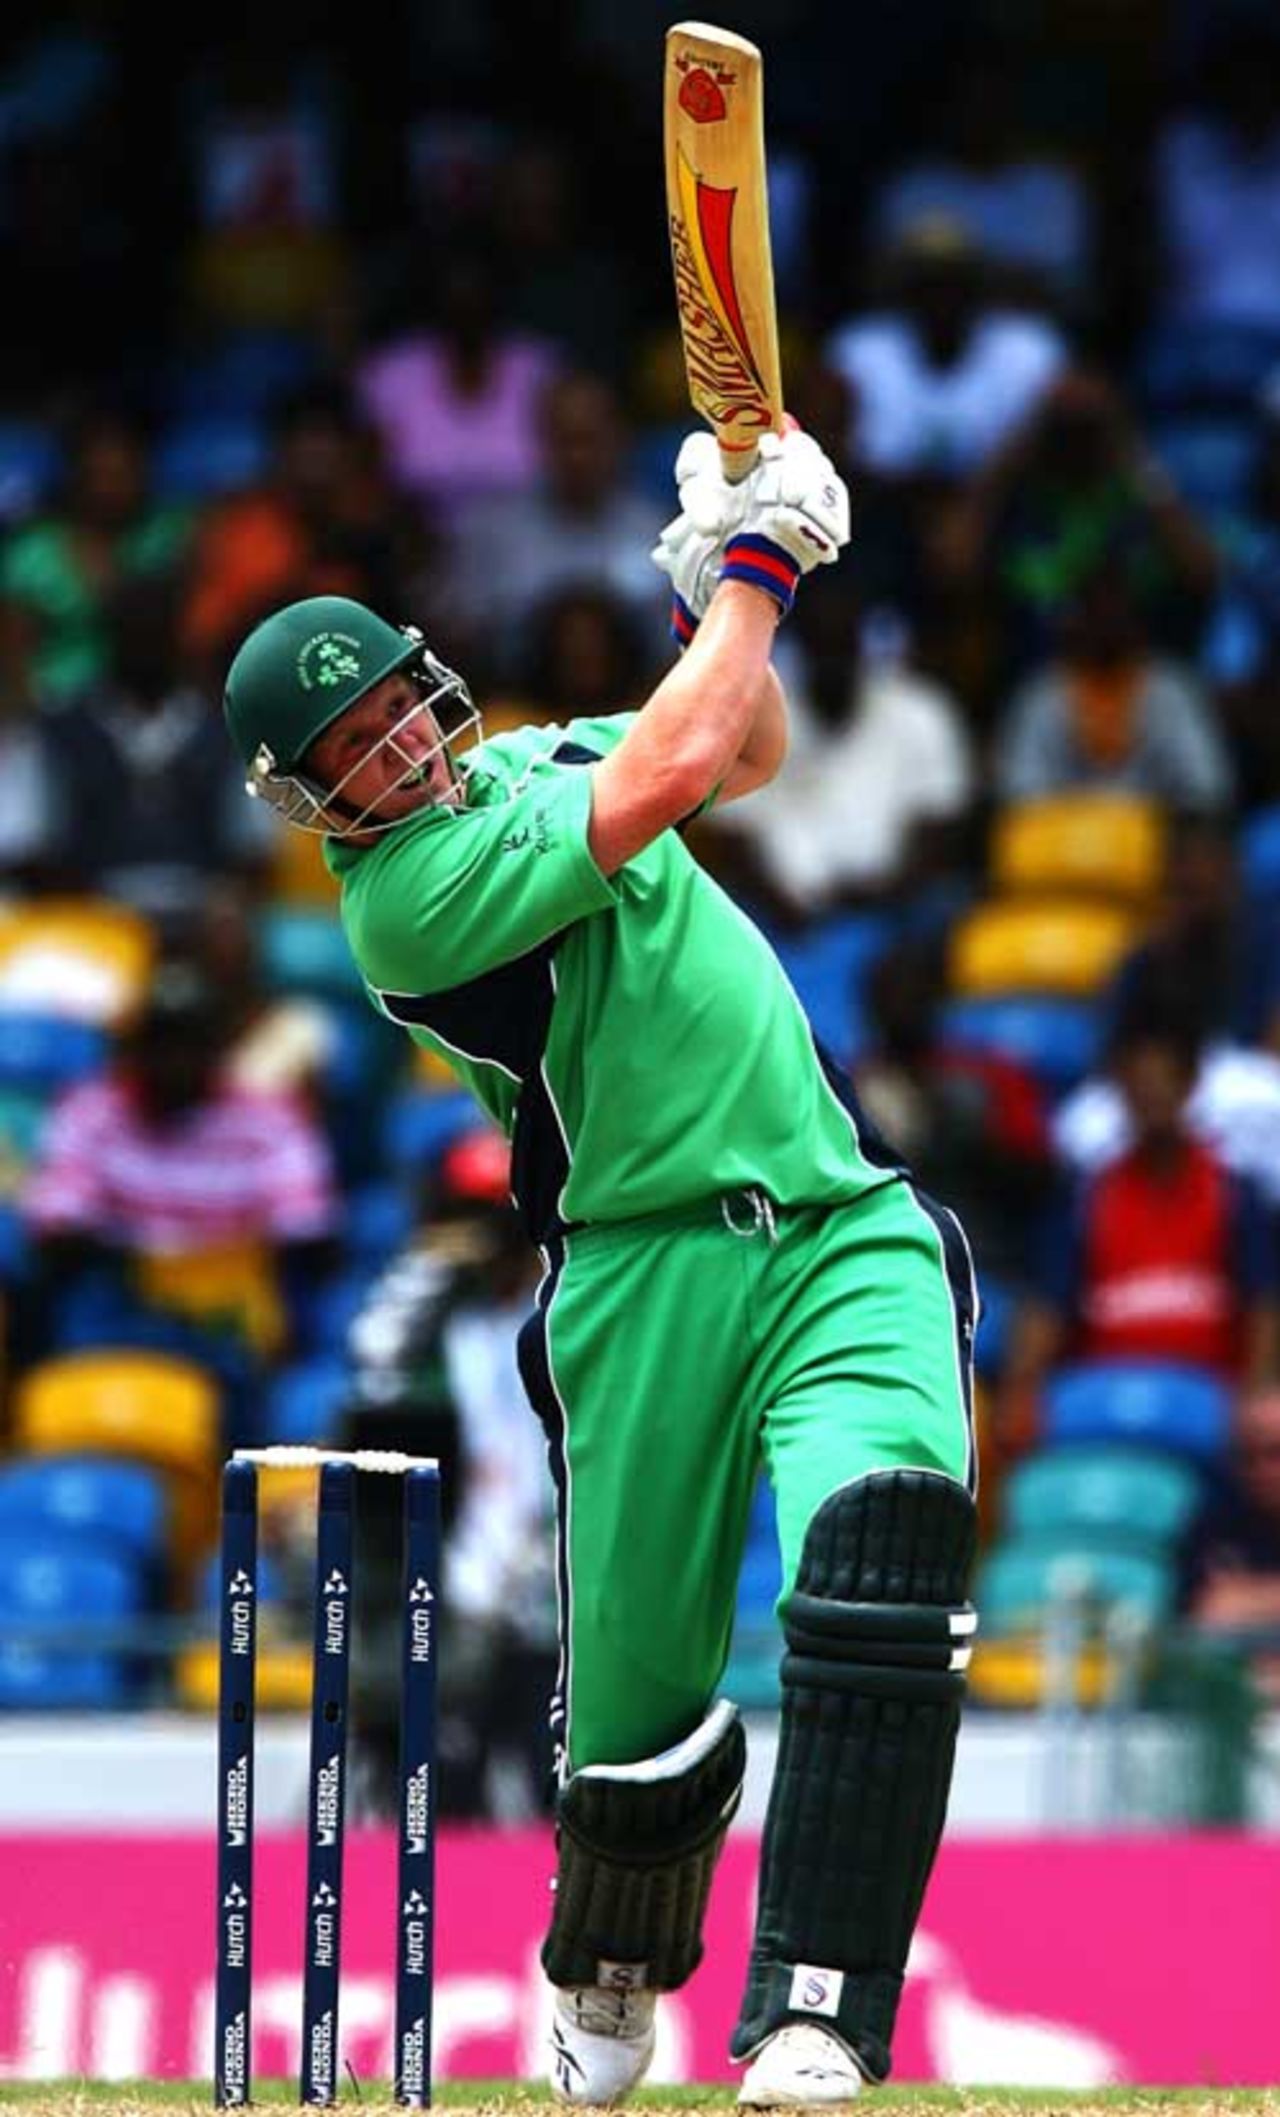 Kevin O'Brien is in no mood to graft as he goes downtown, Bangladesh v Ireland, Super Eights, Barbados, April 15, 2007 